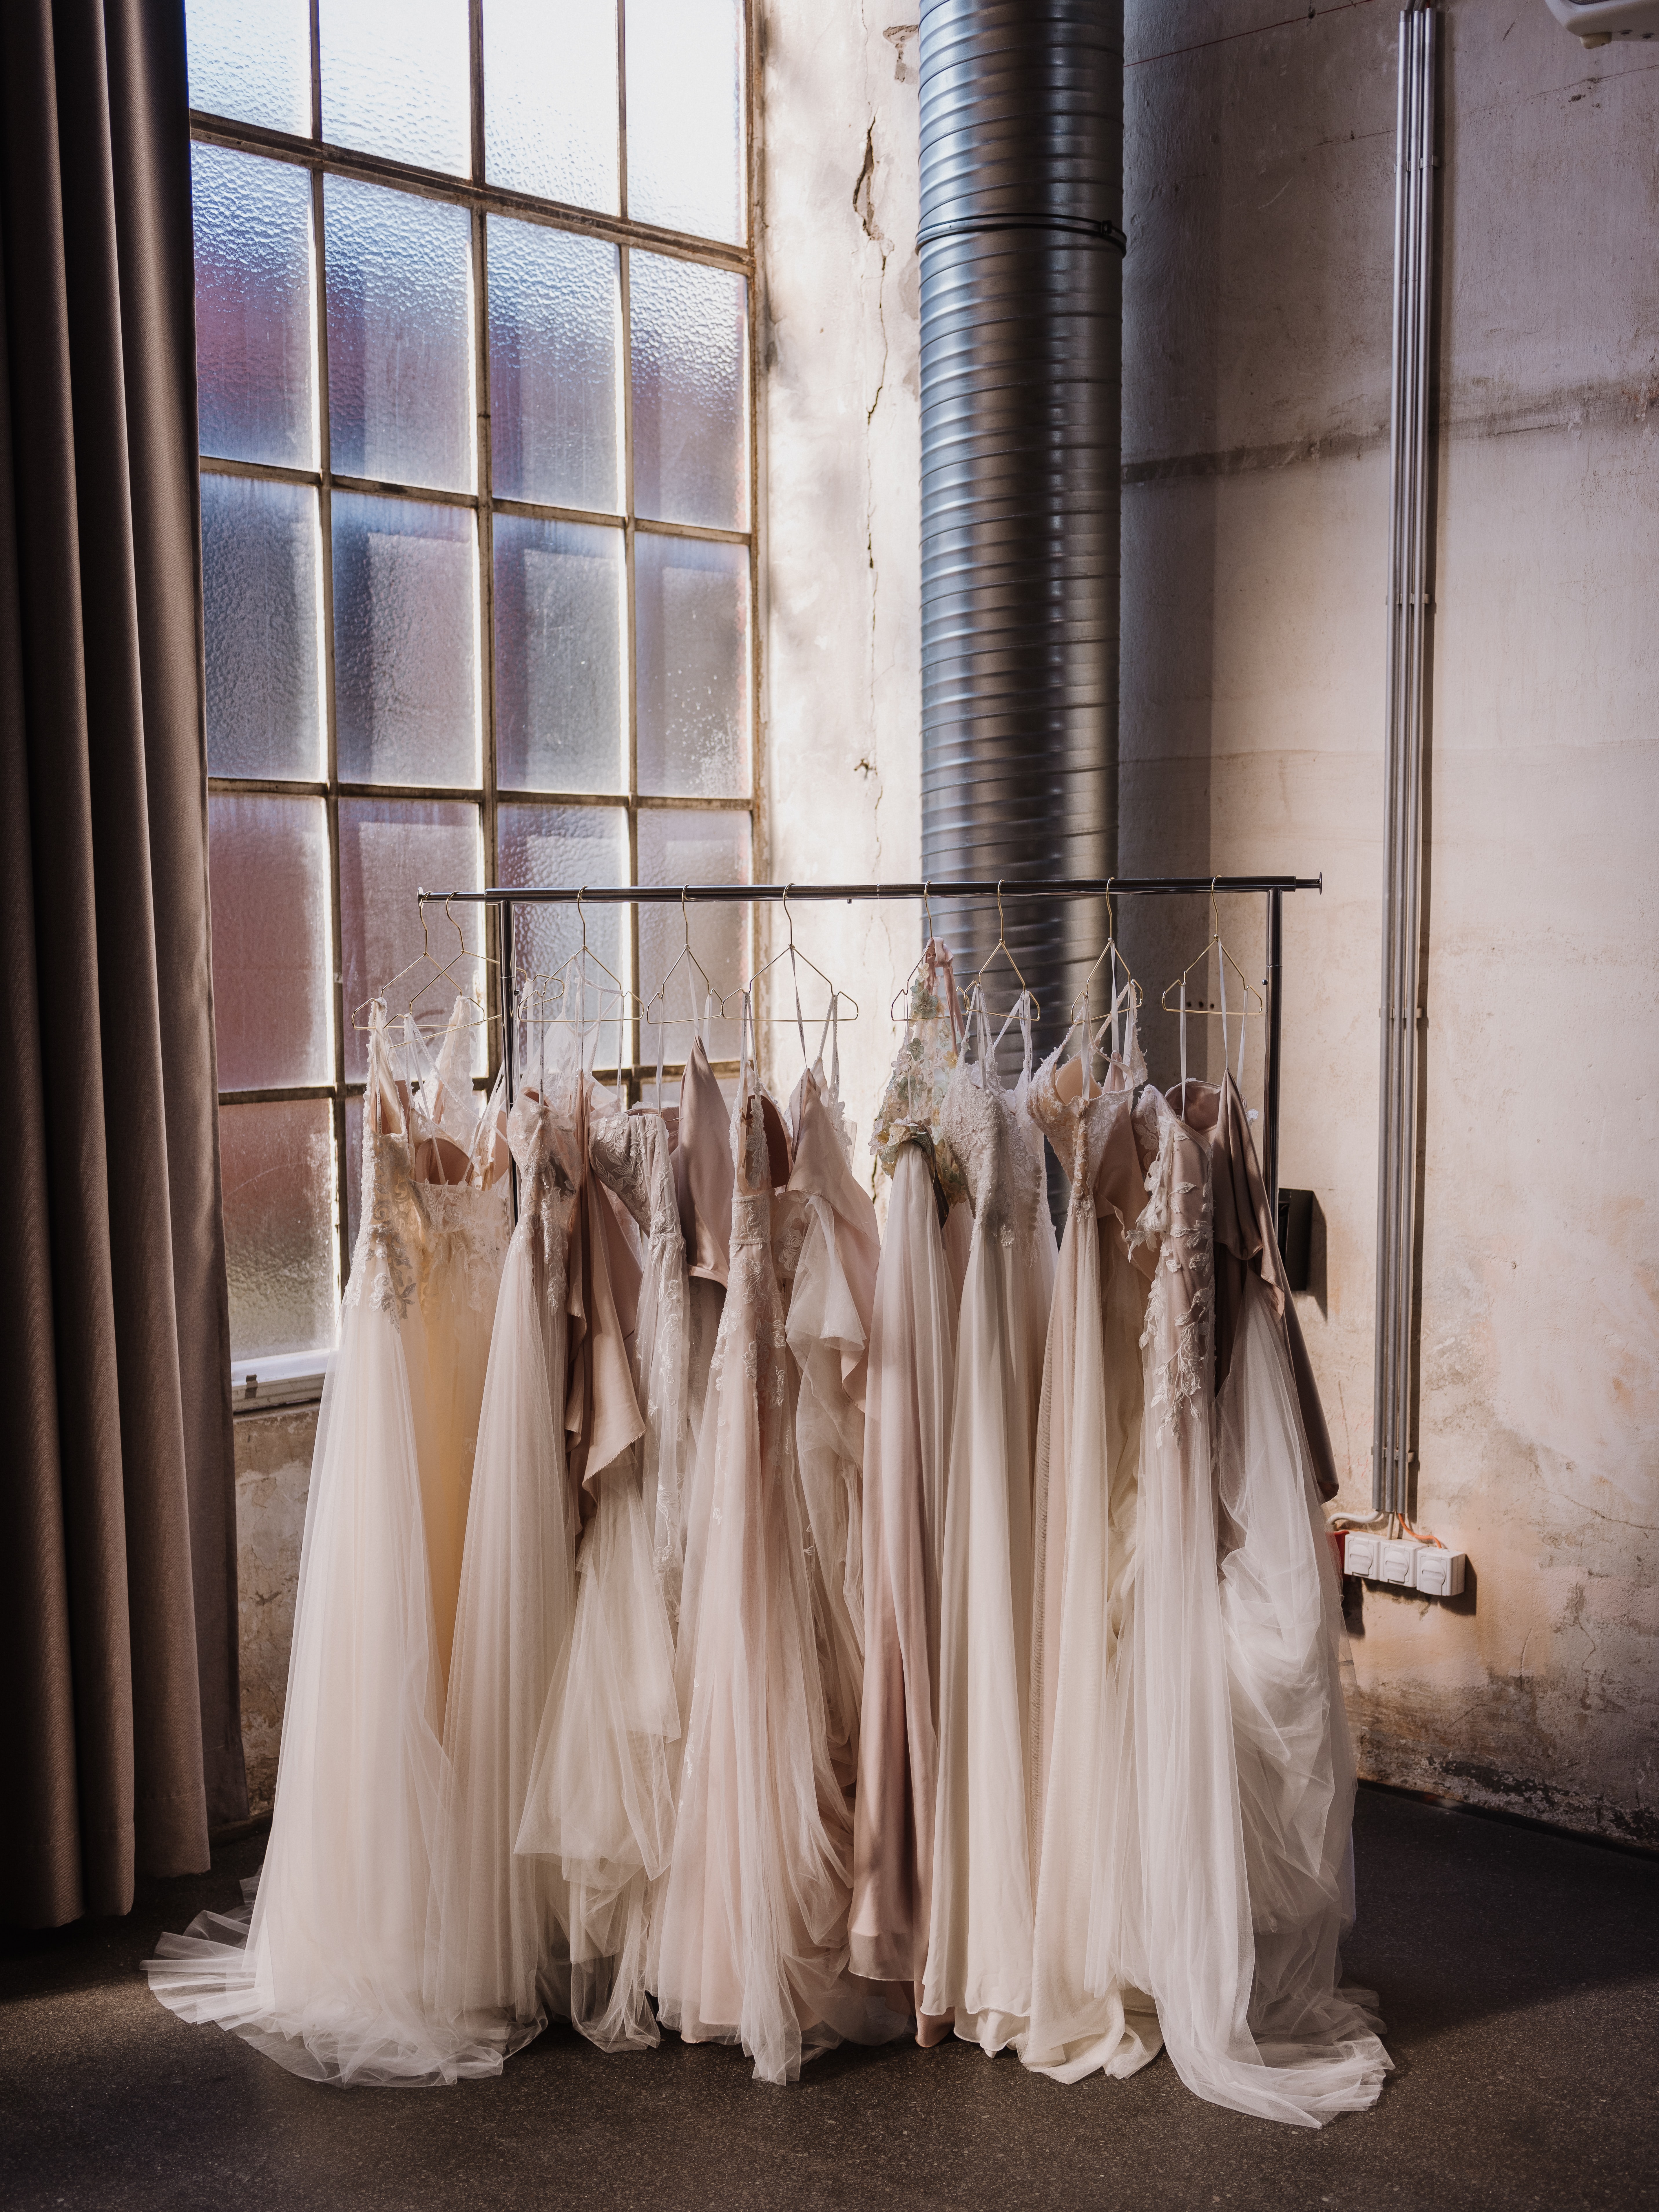 image of bridal gowns hanging on a rack